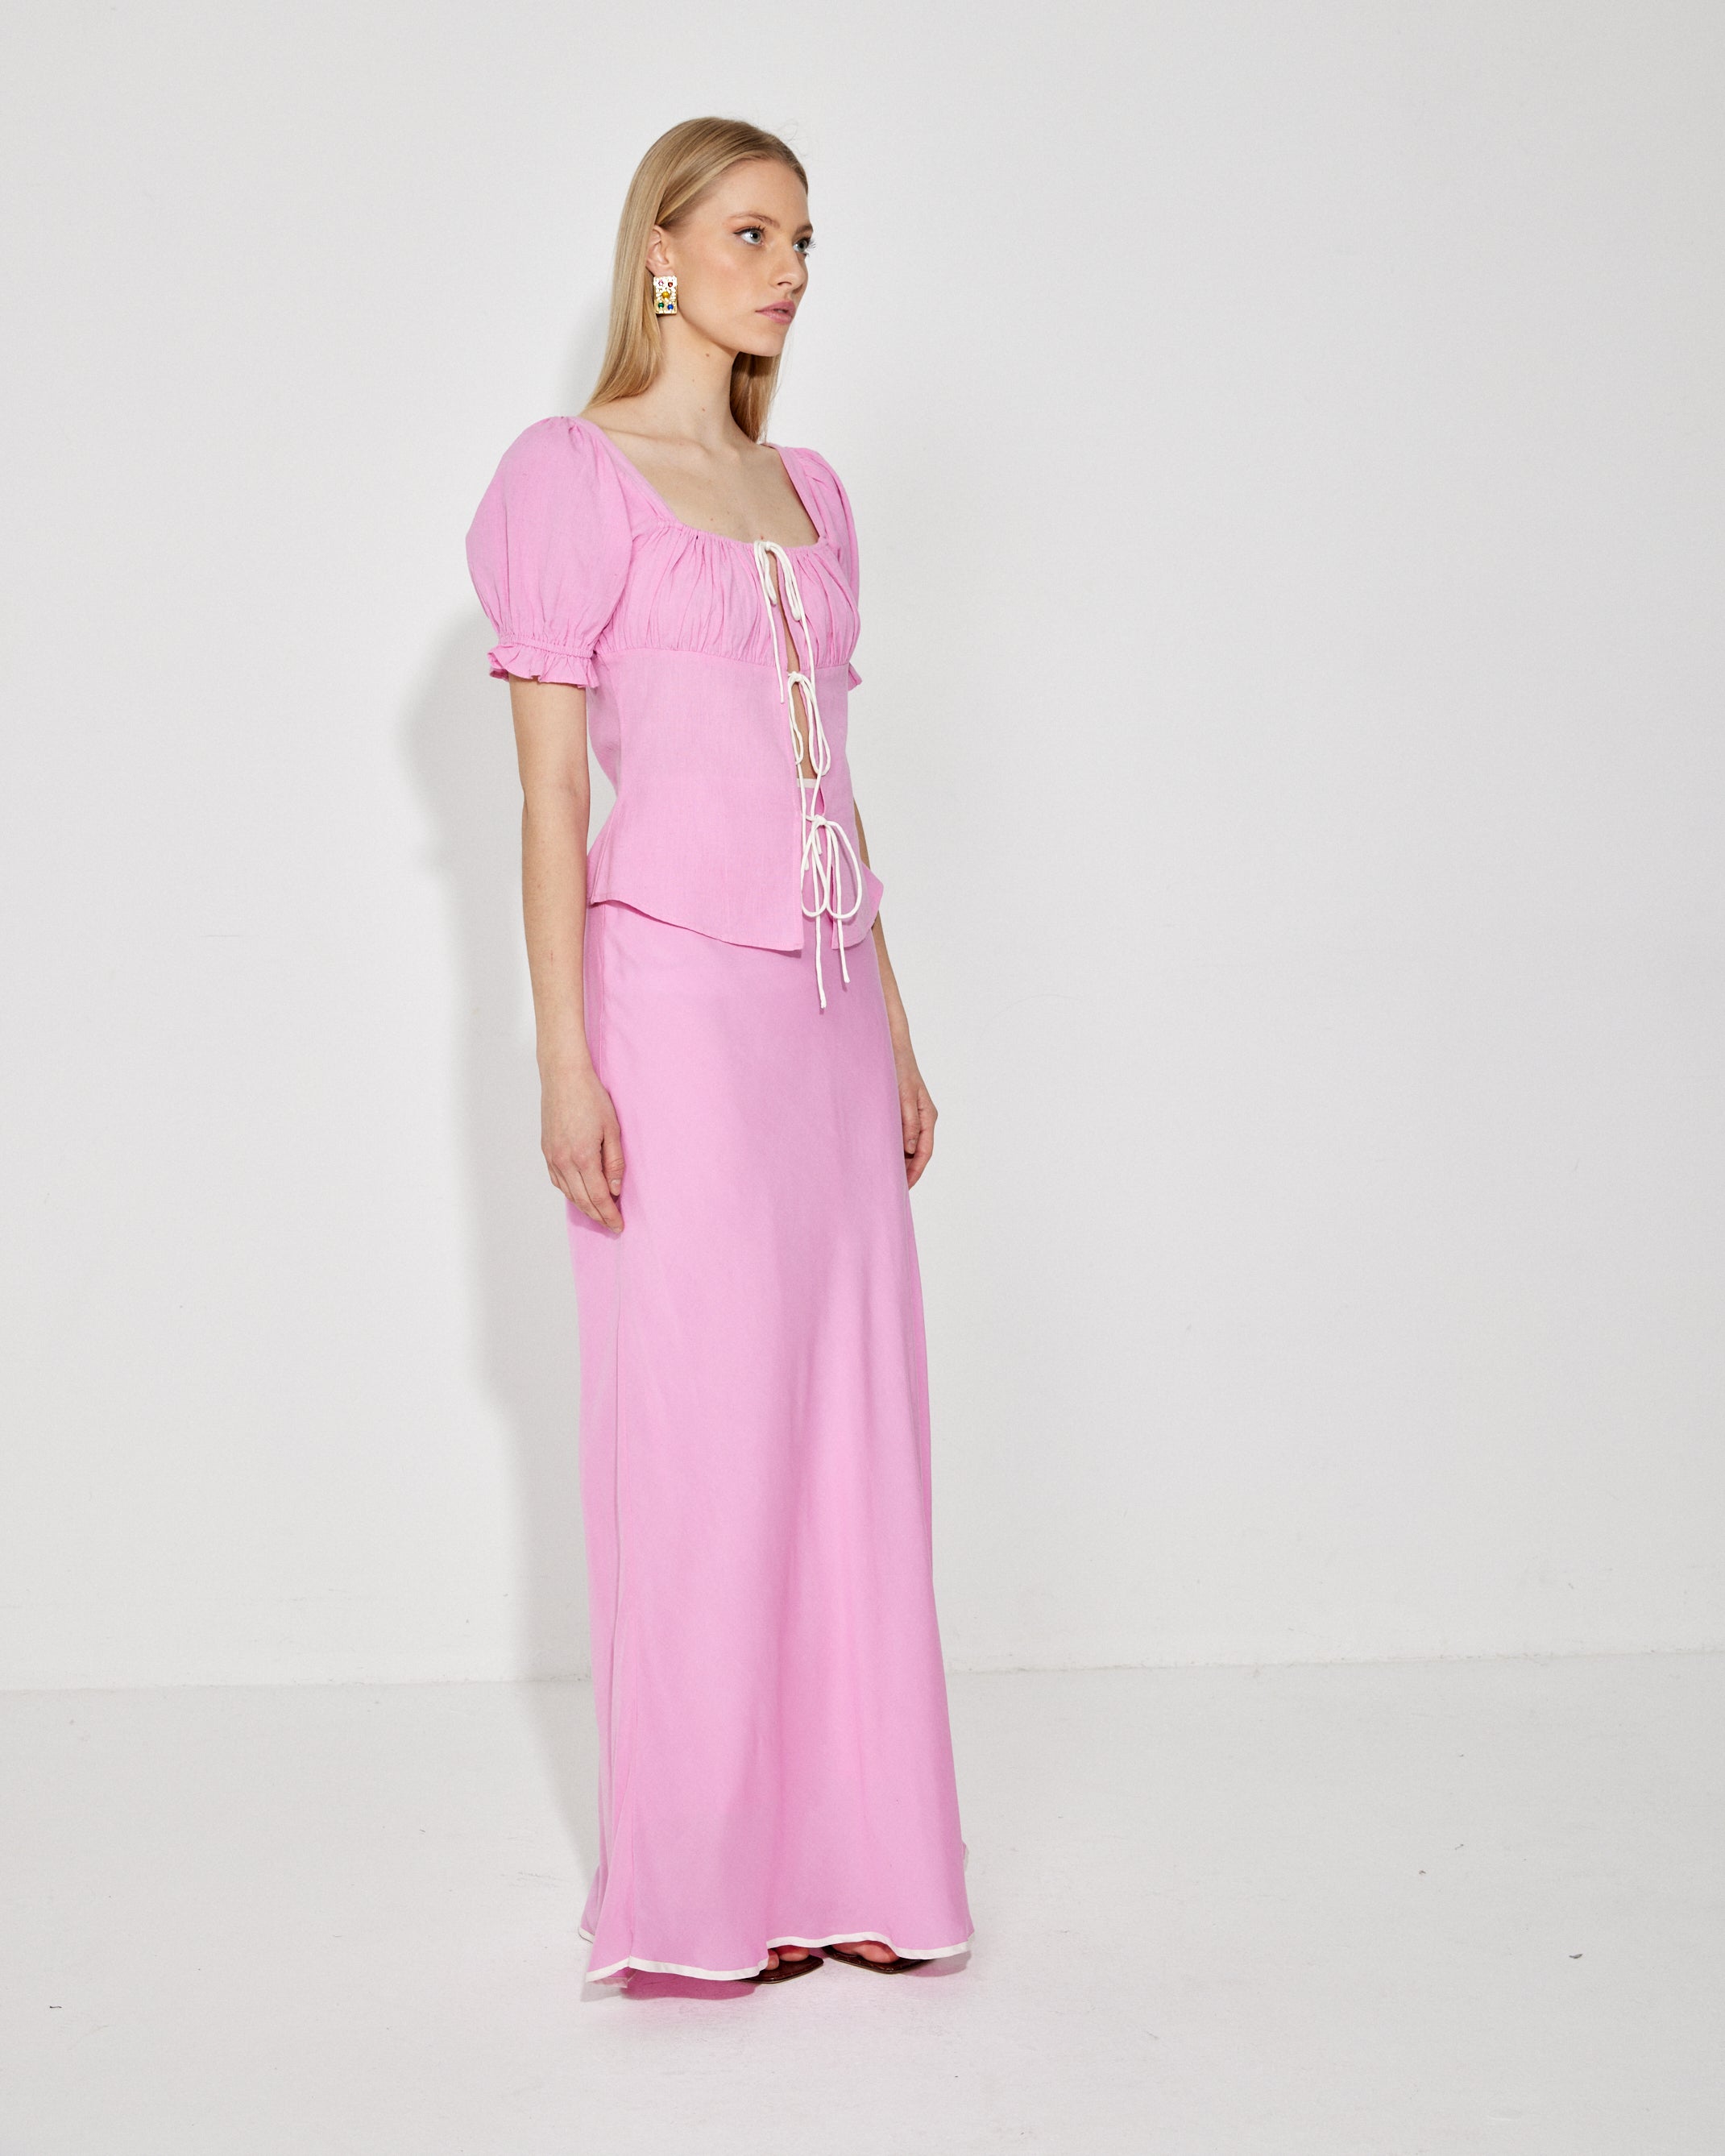 The Peony Maxi Skirt in Pink